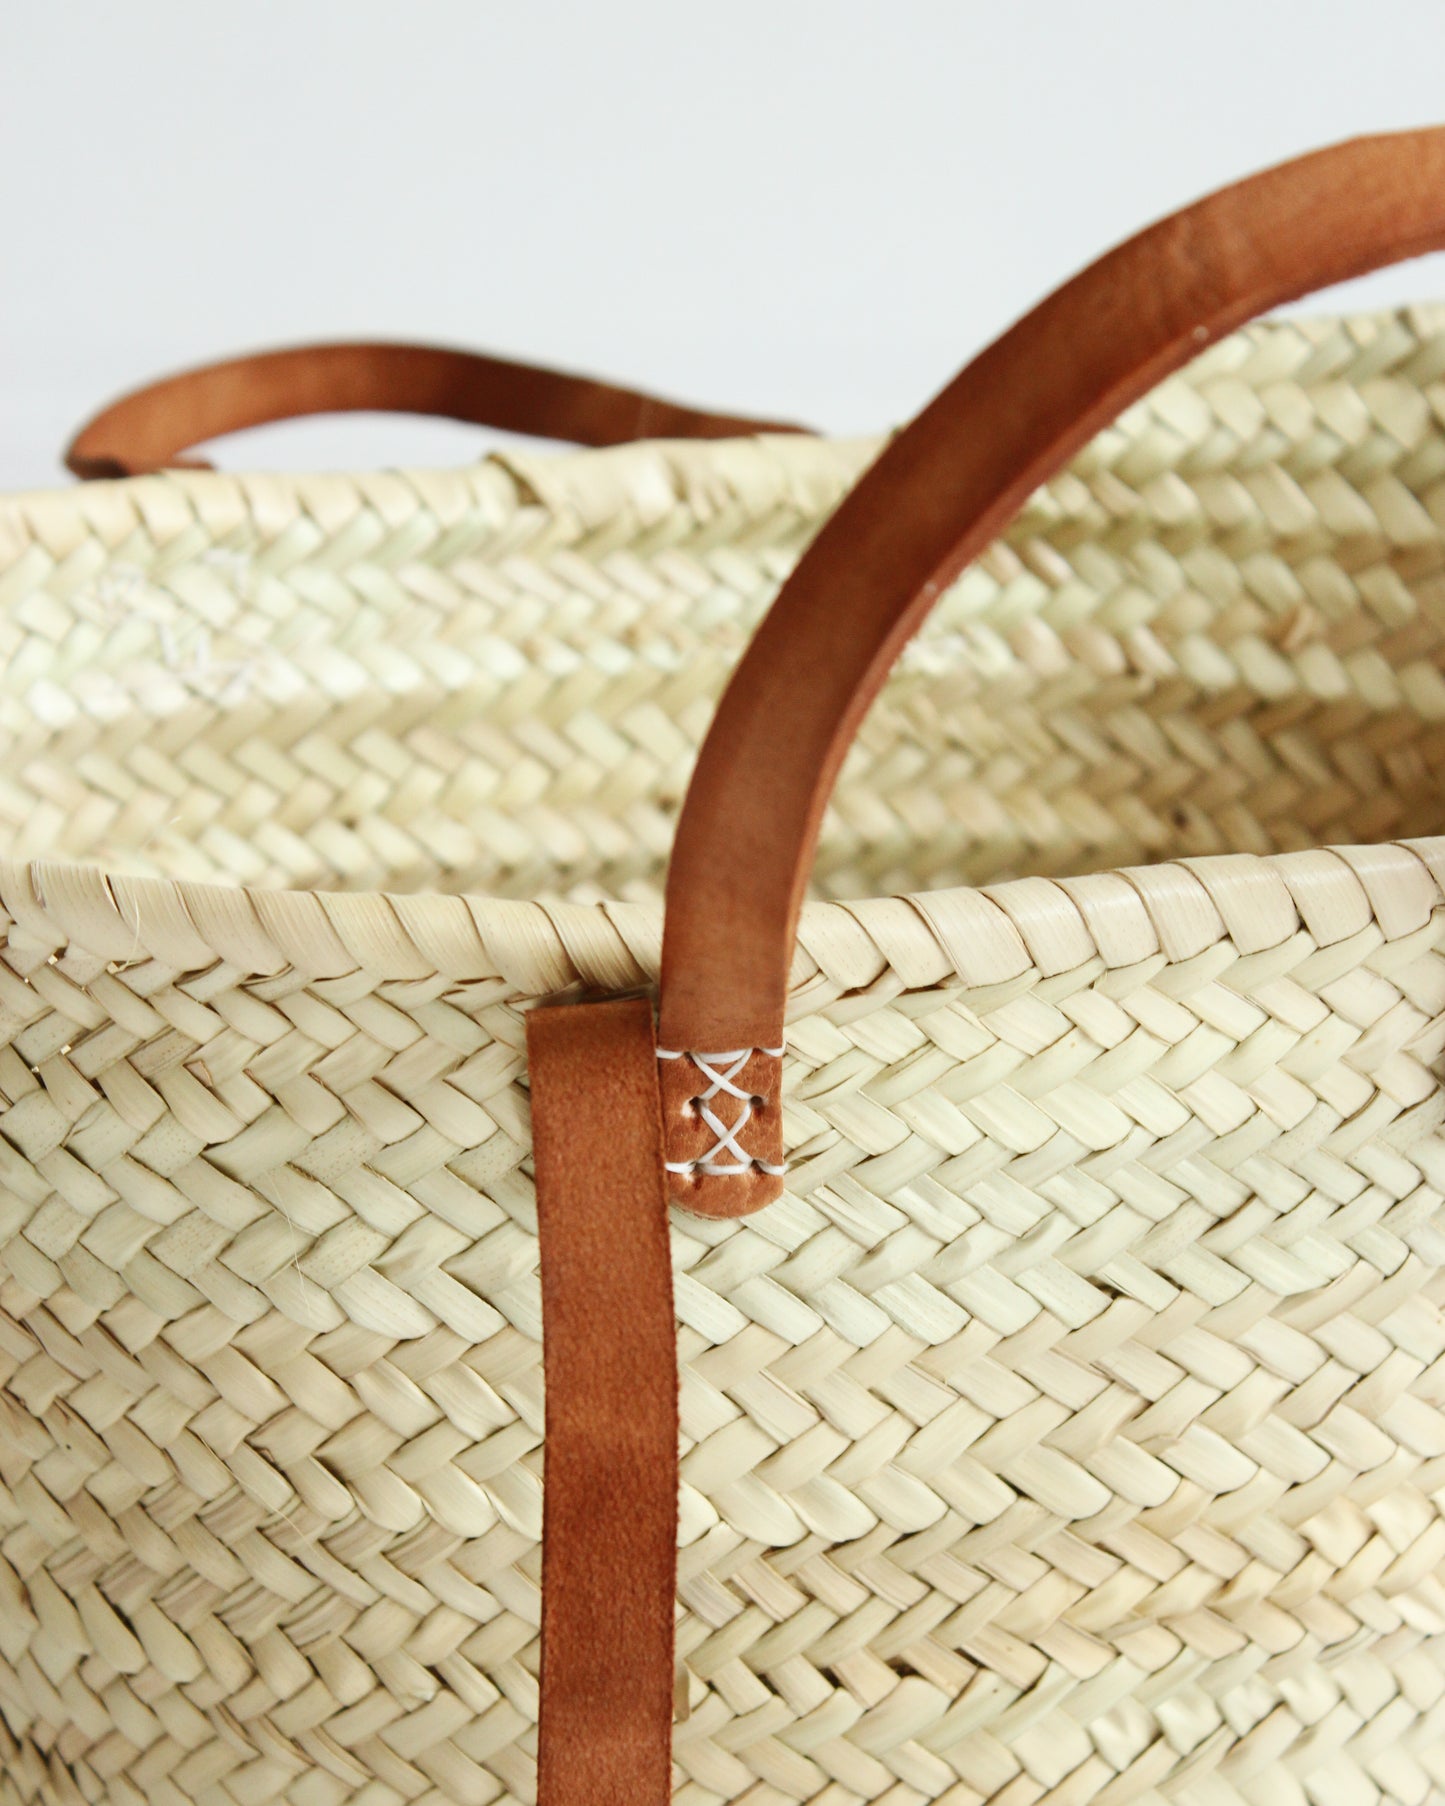 Handwoven Moroccan Palm Basket With Leather Straps